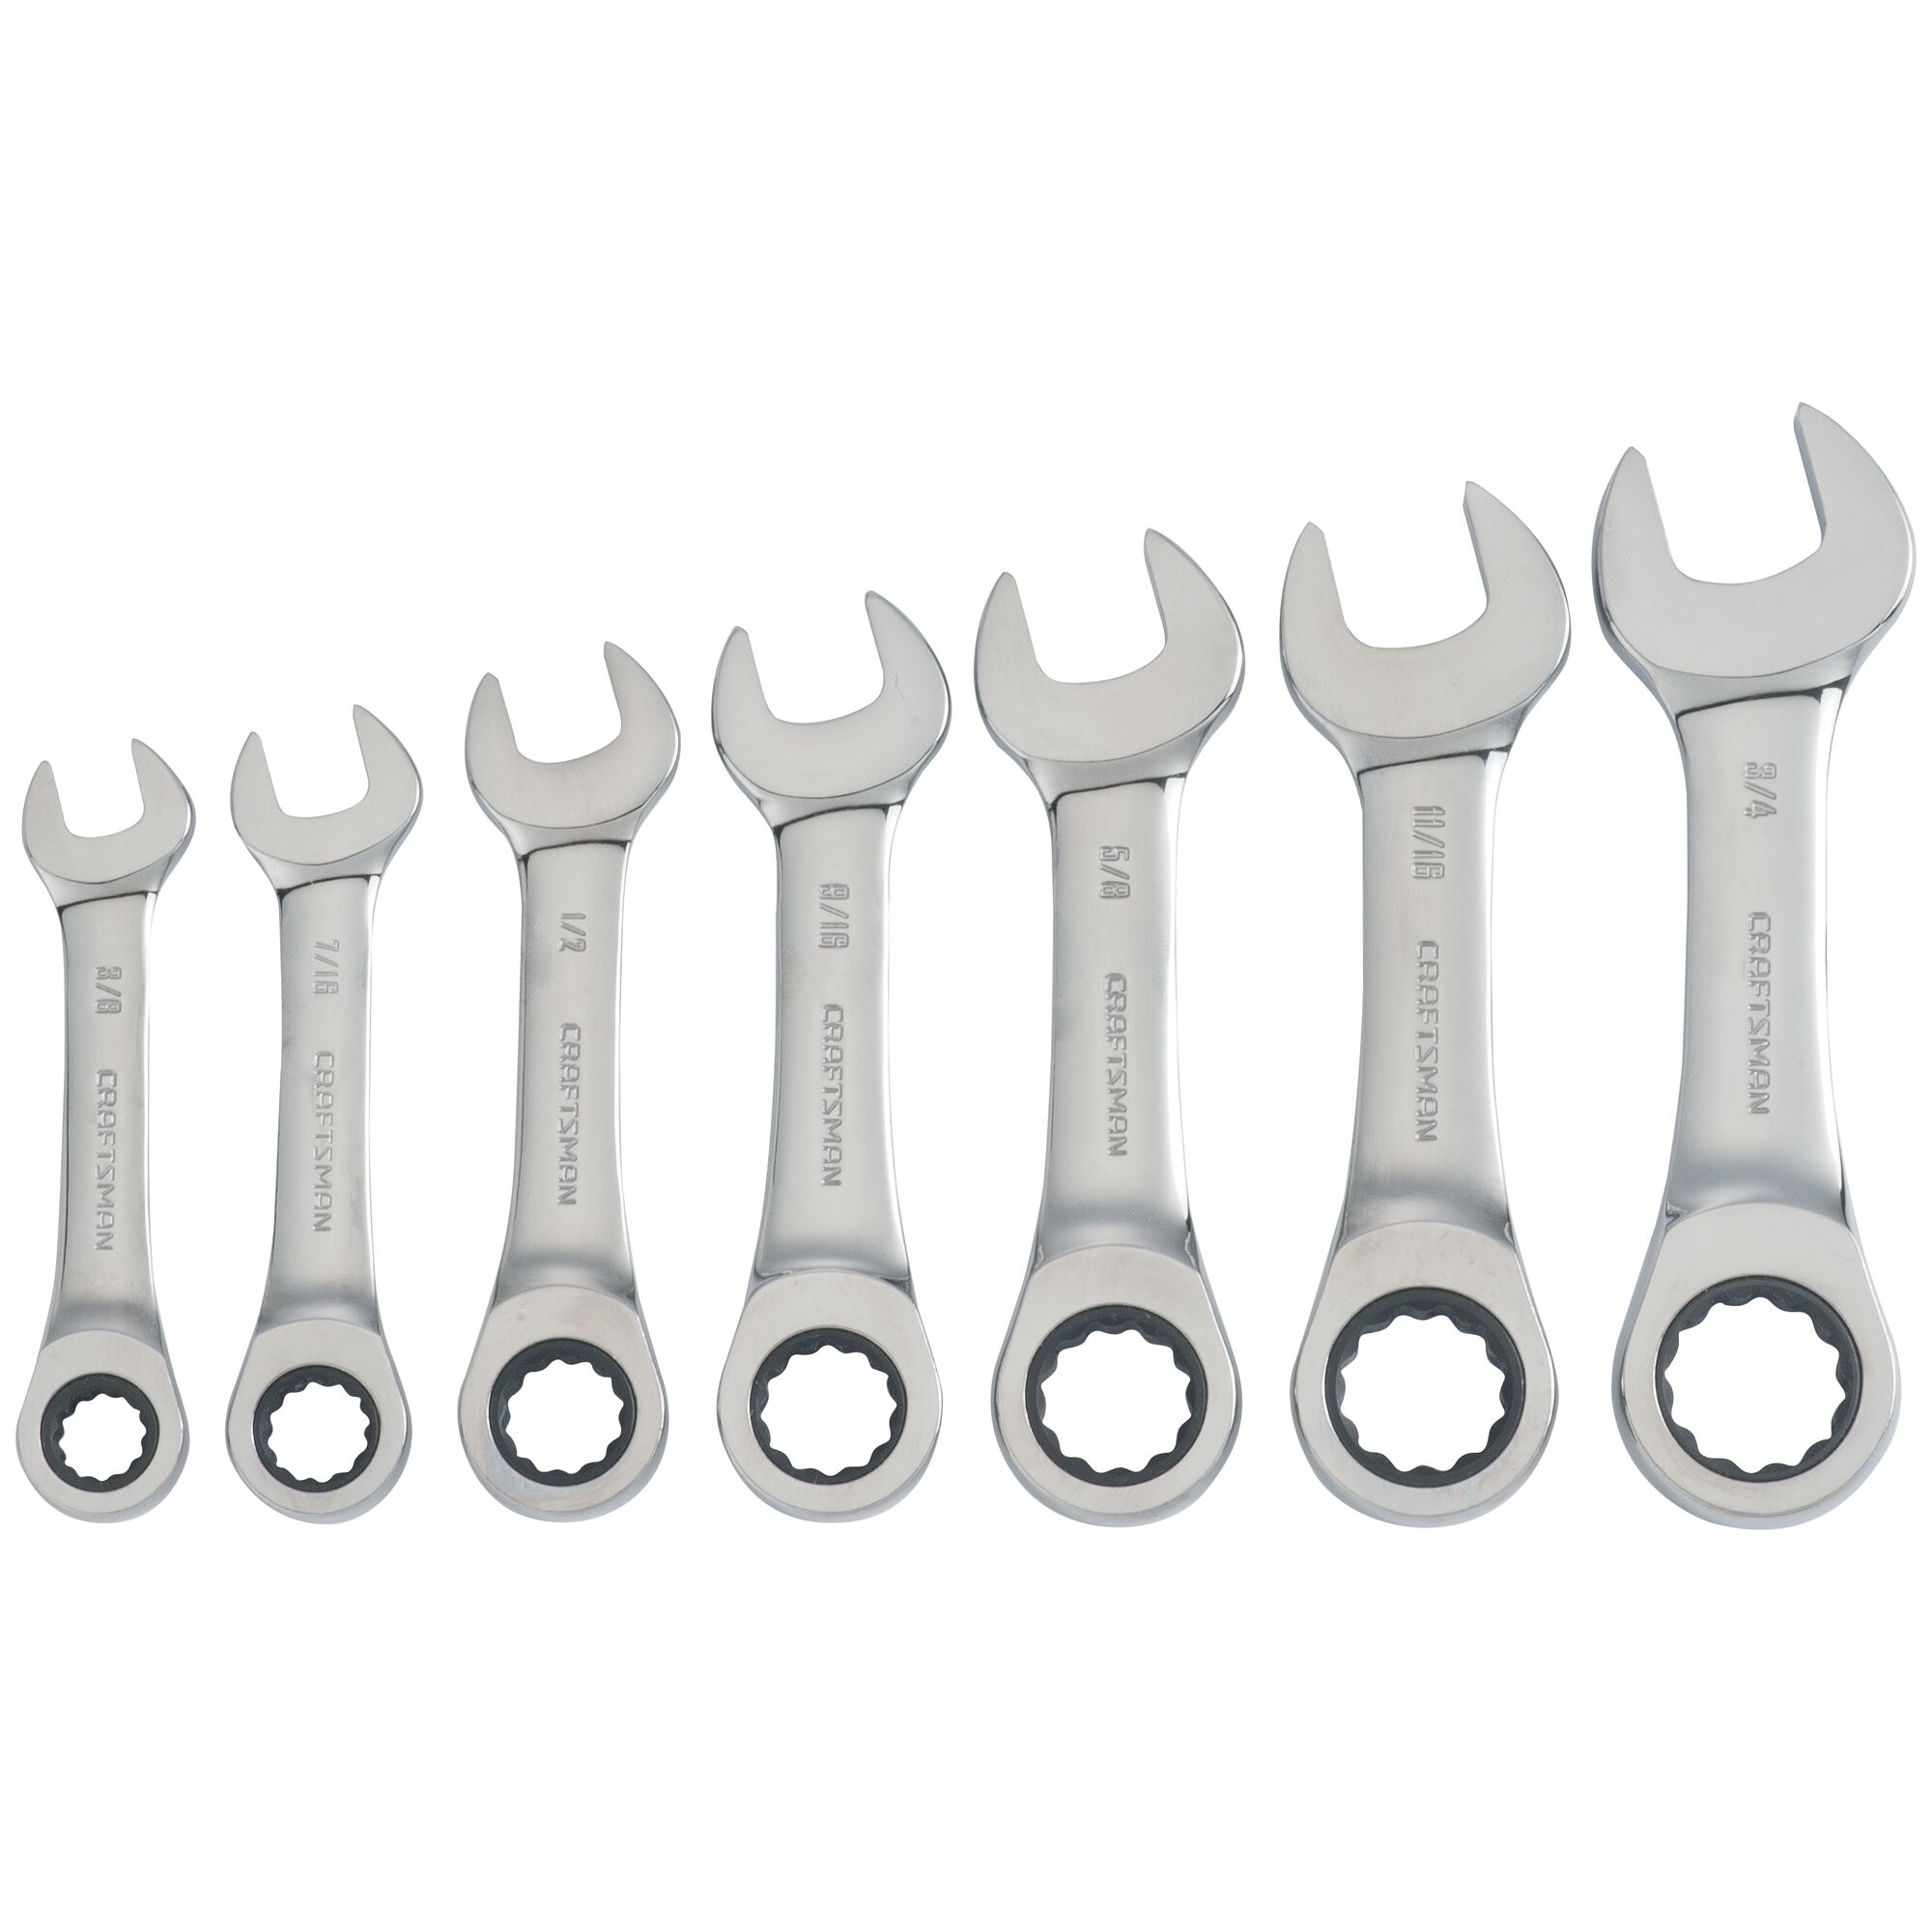 Profile of 7 piece S A E stubby ratcheting wrench set.